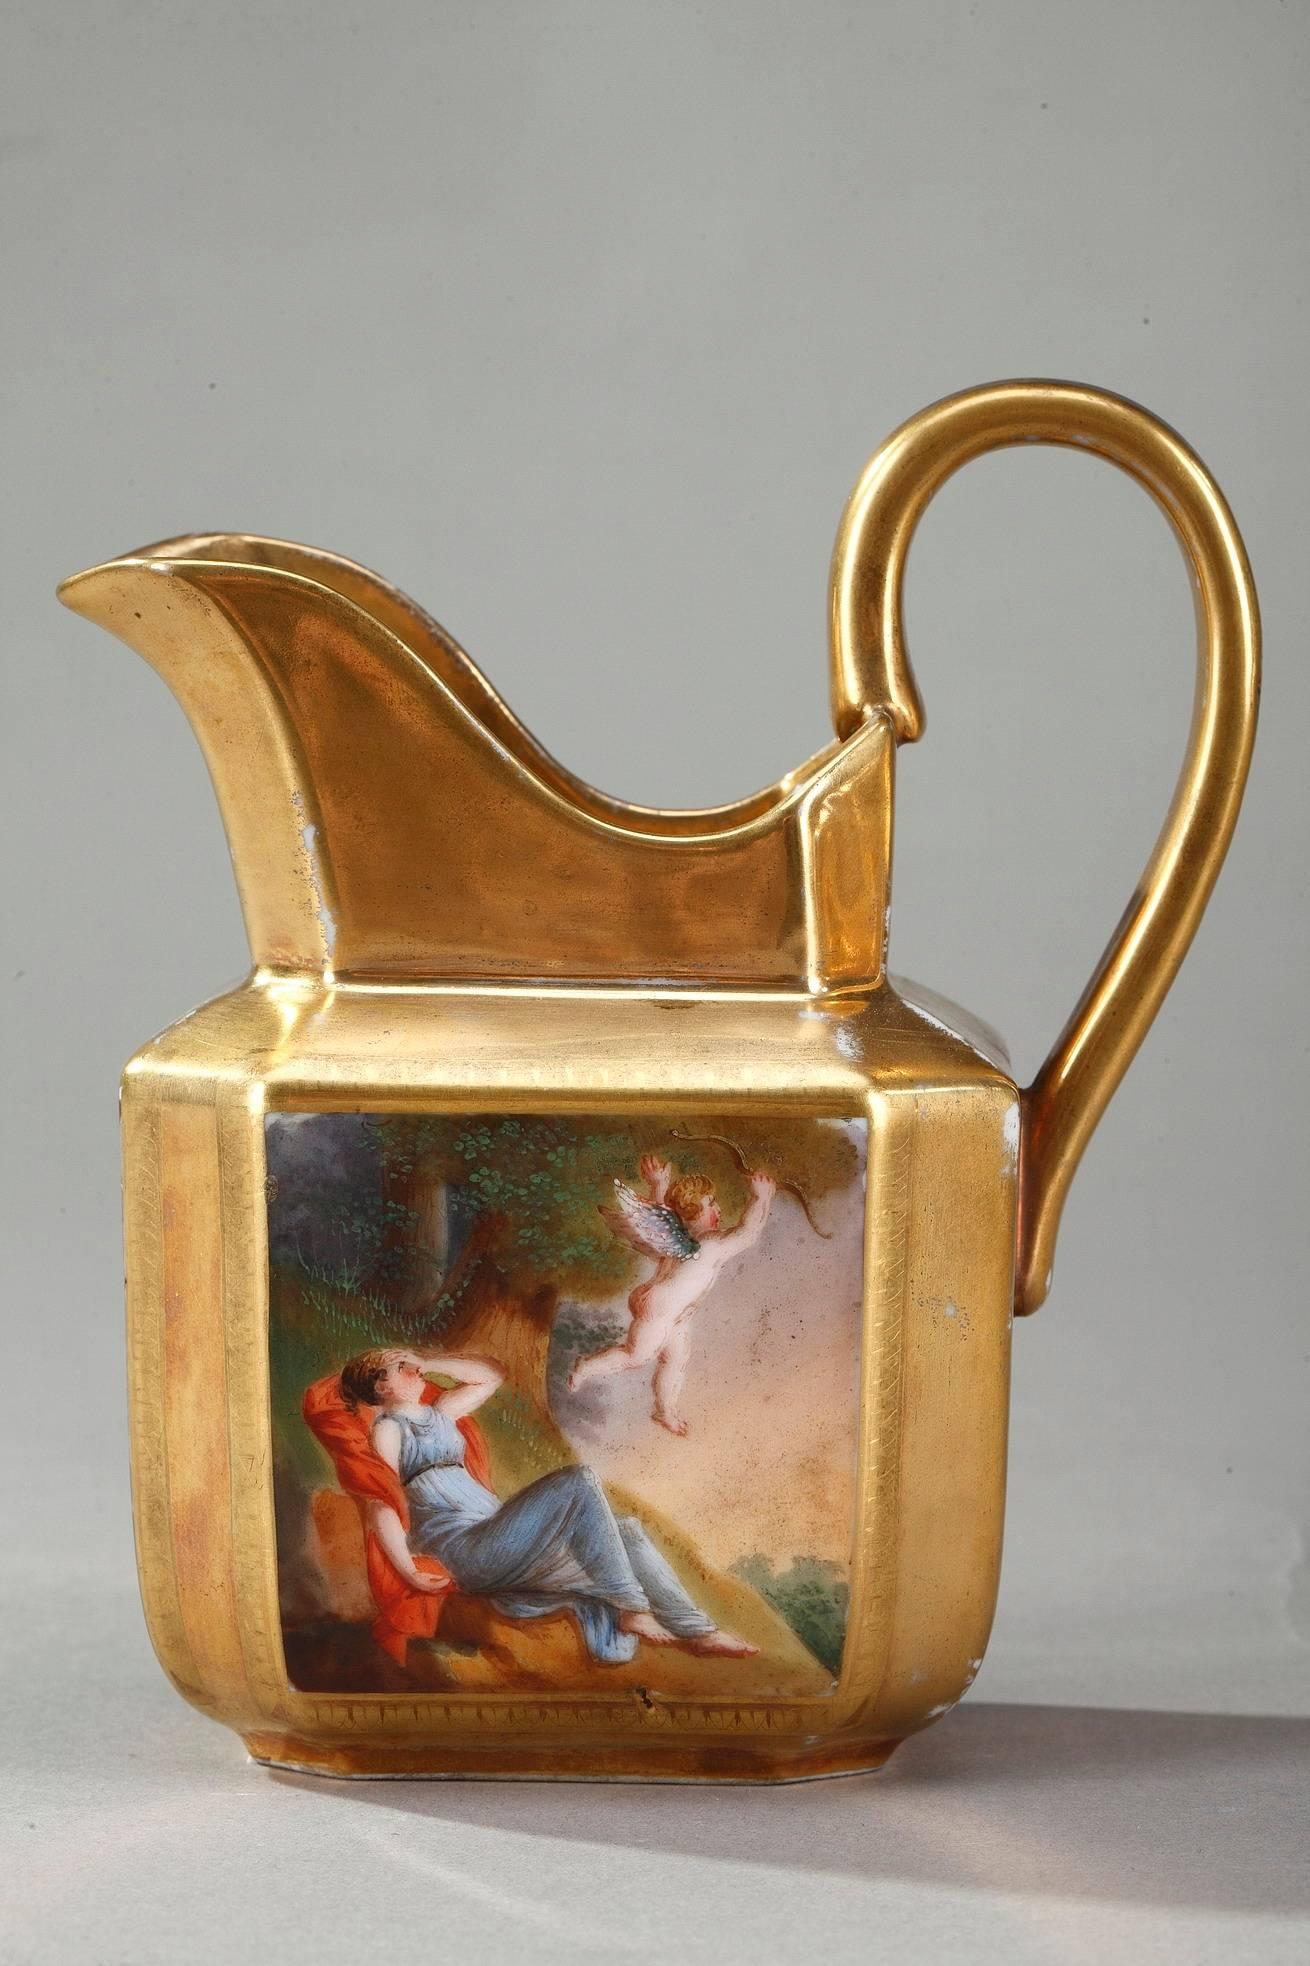 Hand-Painted Empire Porcelain Coffee Service with Mythological Scenes